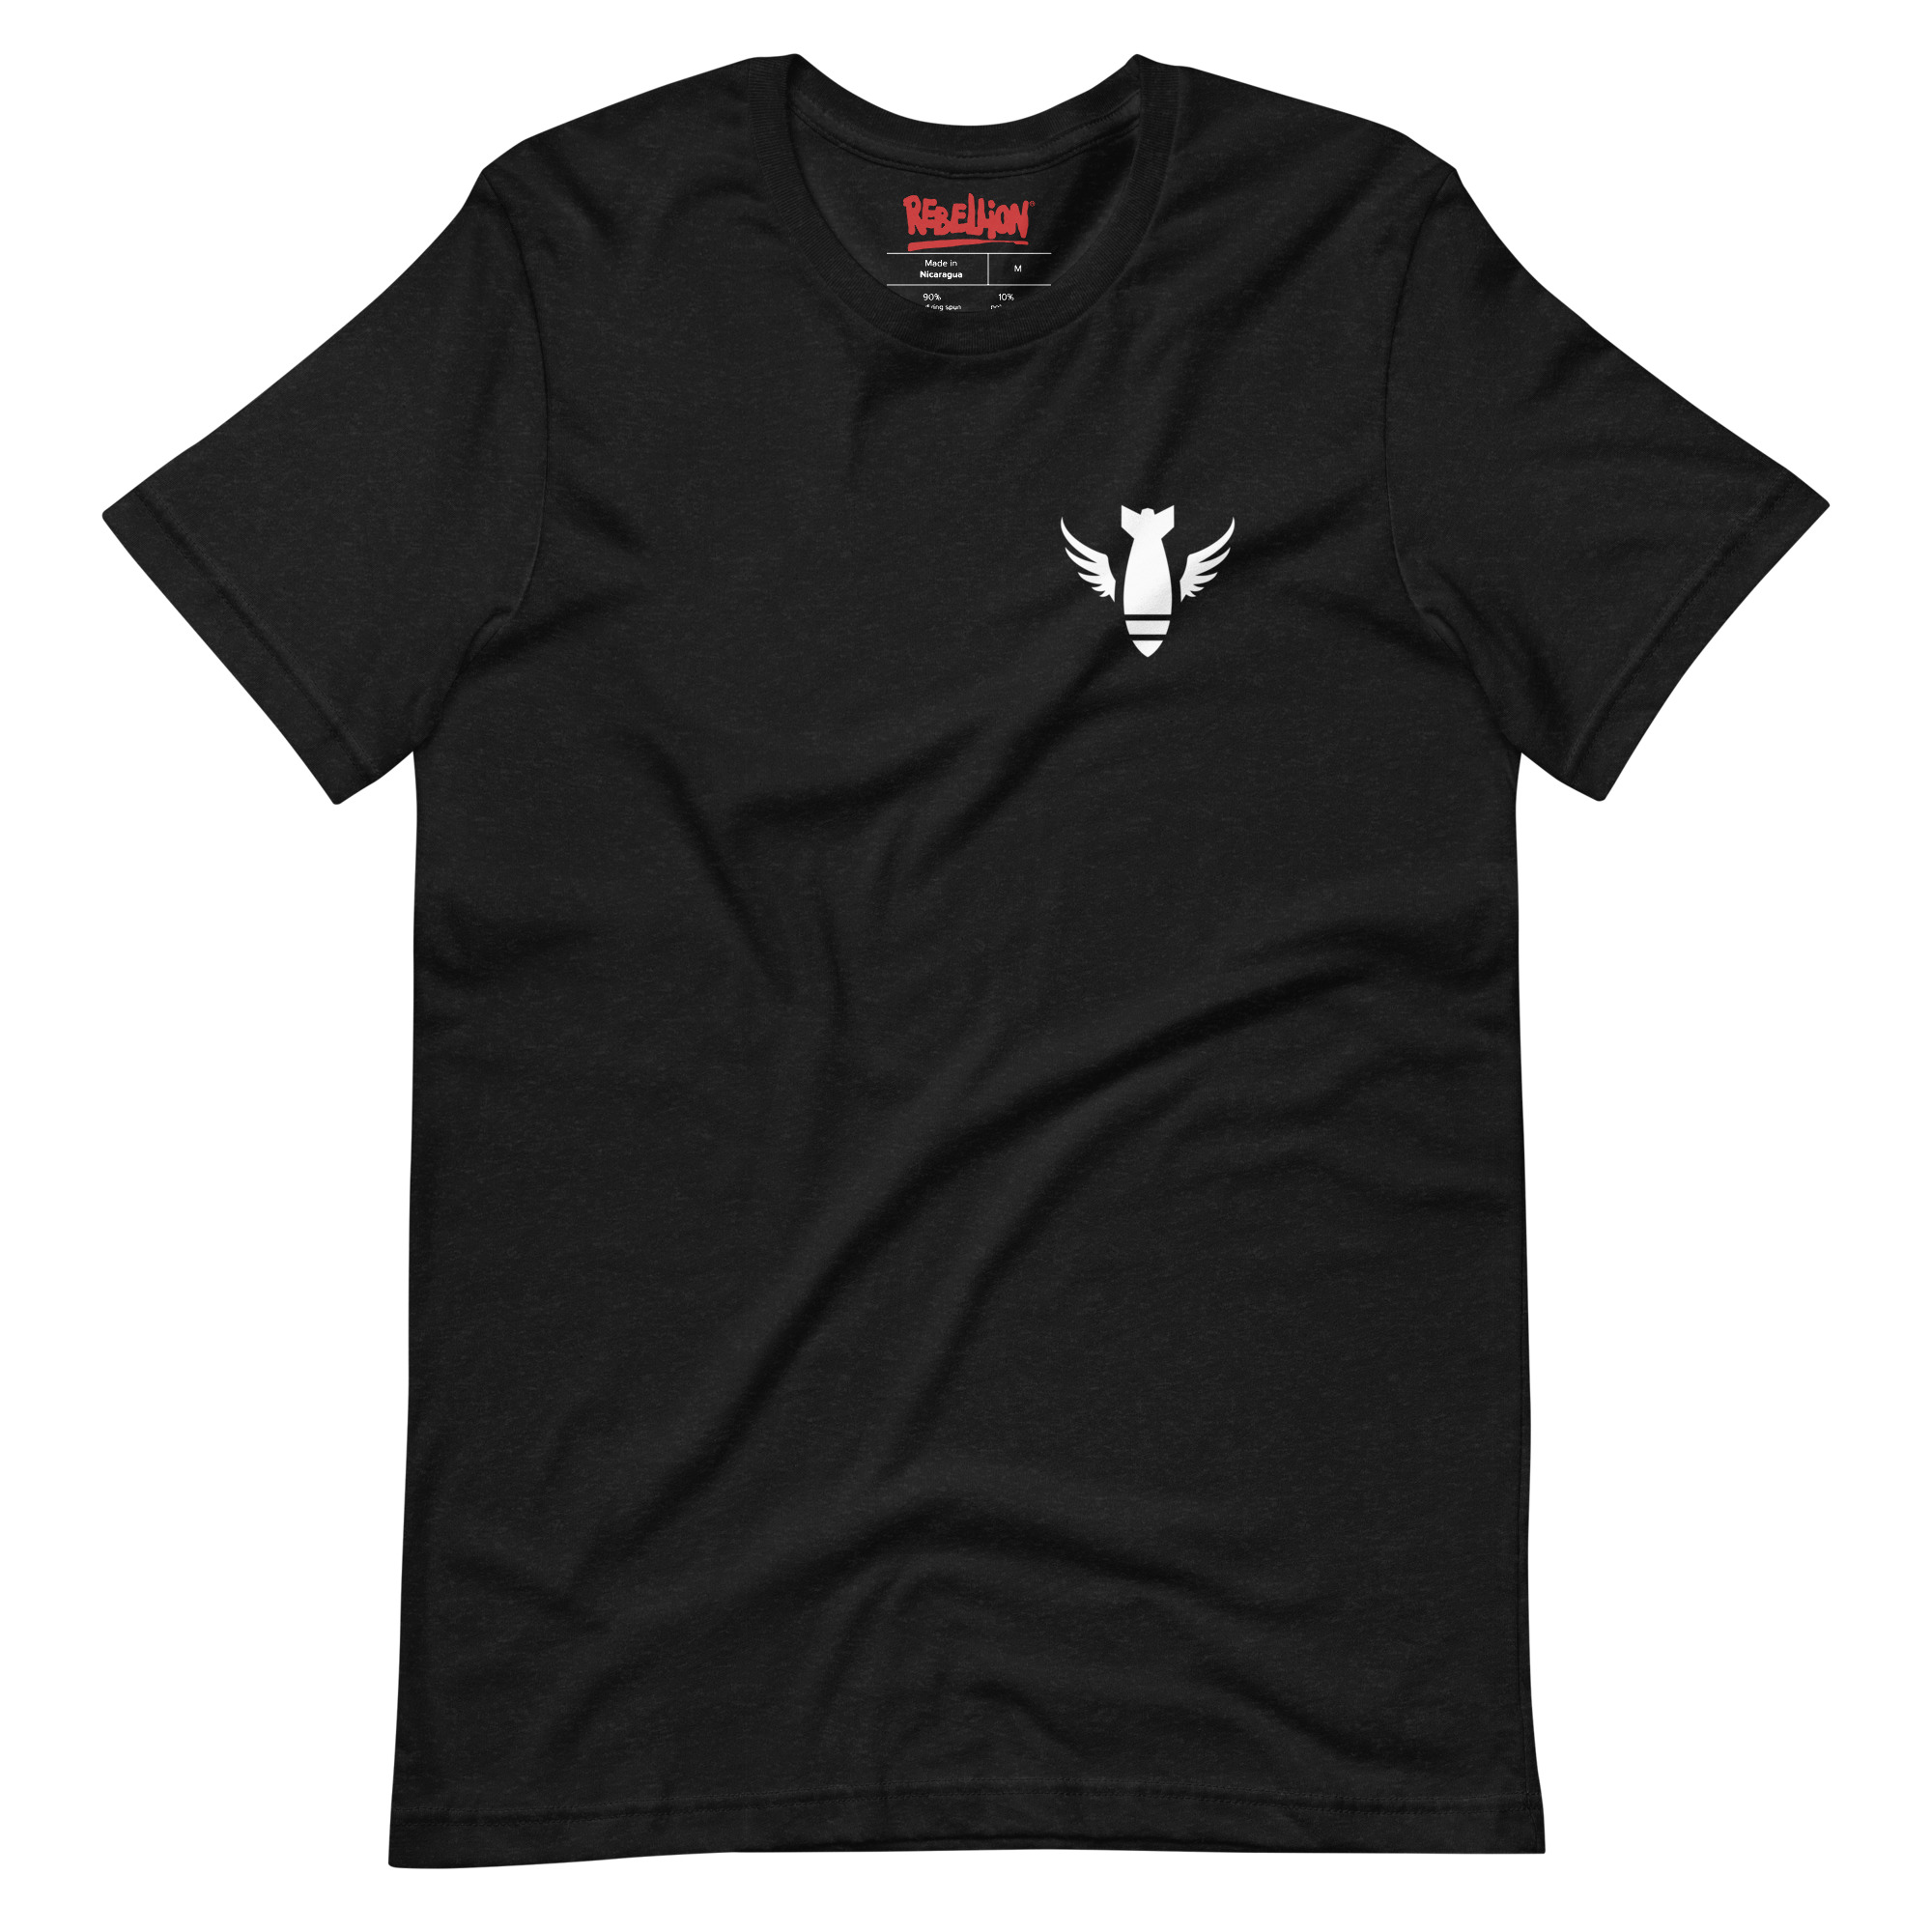 Image of a black coloured Sniper Elite 5 t-shirt featuring a small Commandos emblem on the left breast pocket